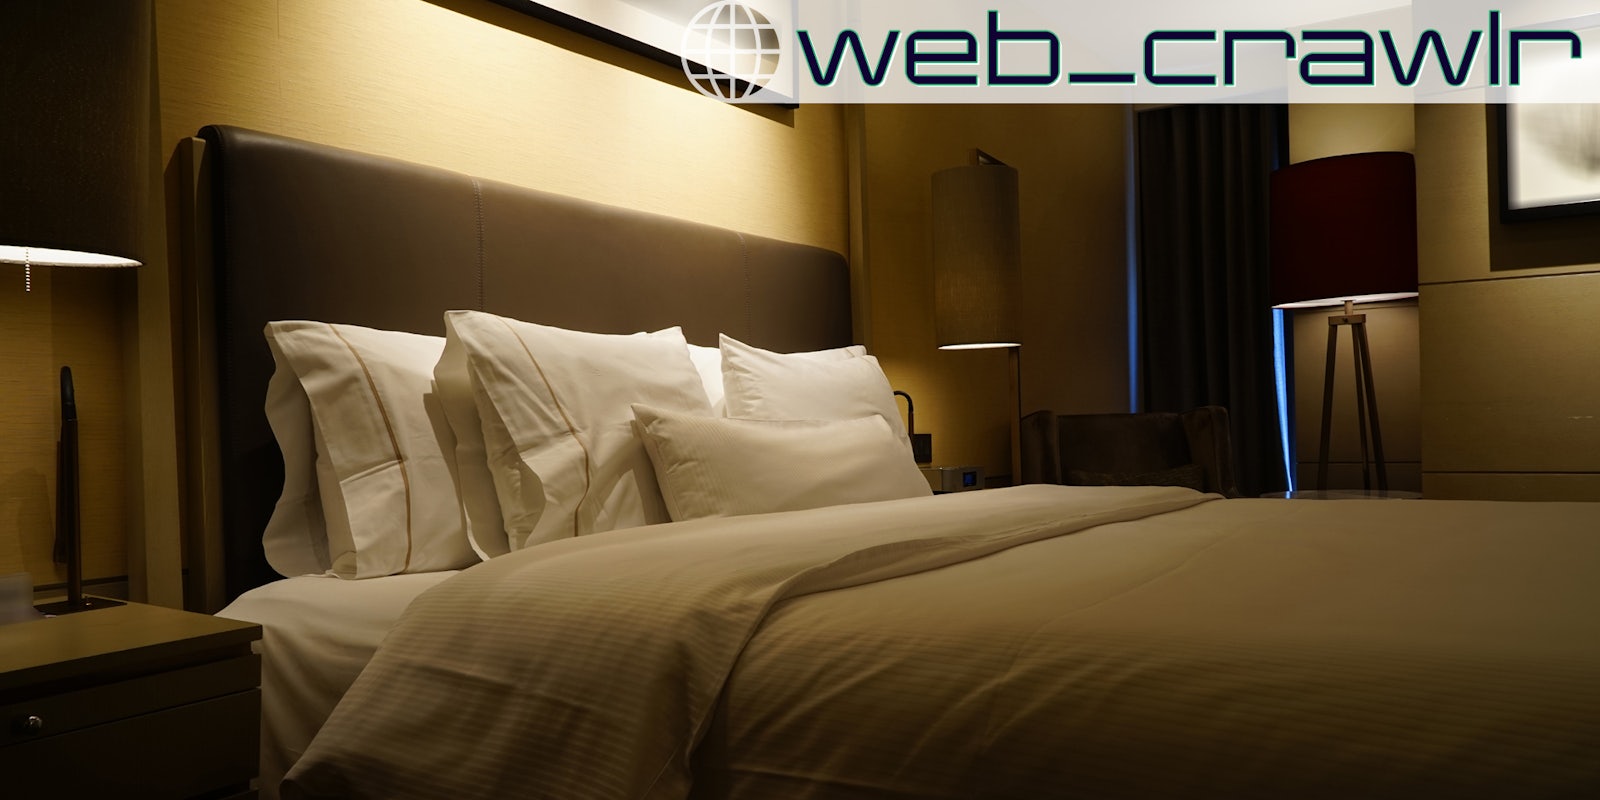 A bed. The Daily Dot newsletter web_crawlr logo is in the top right corner.